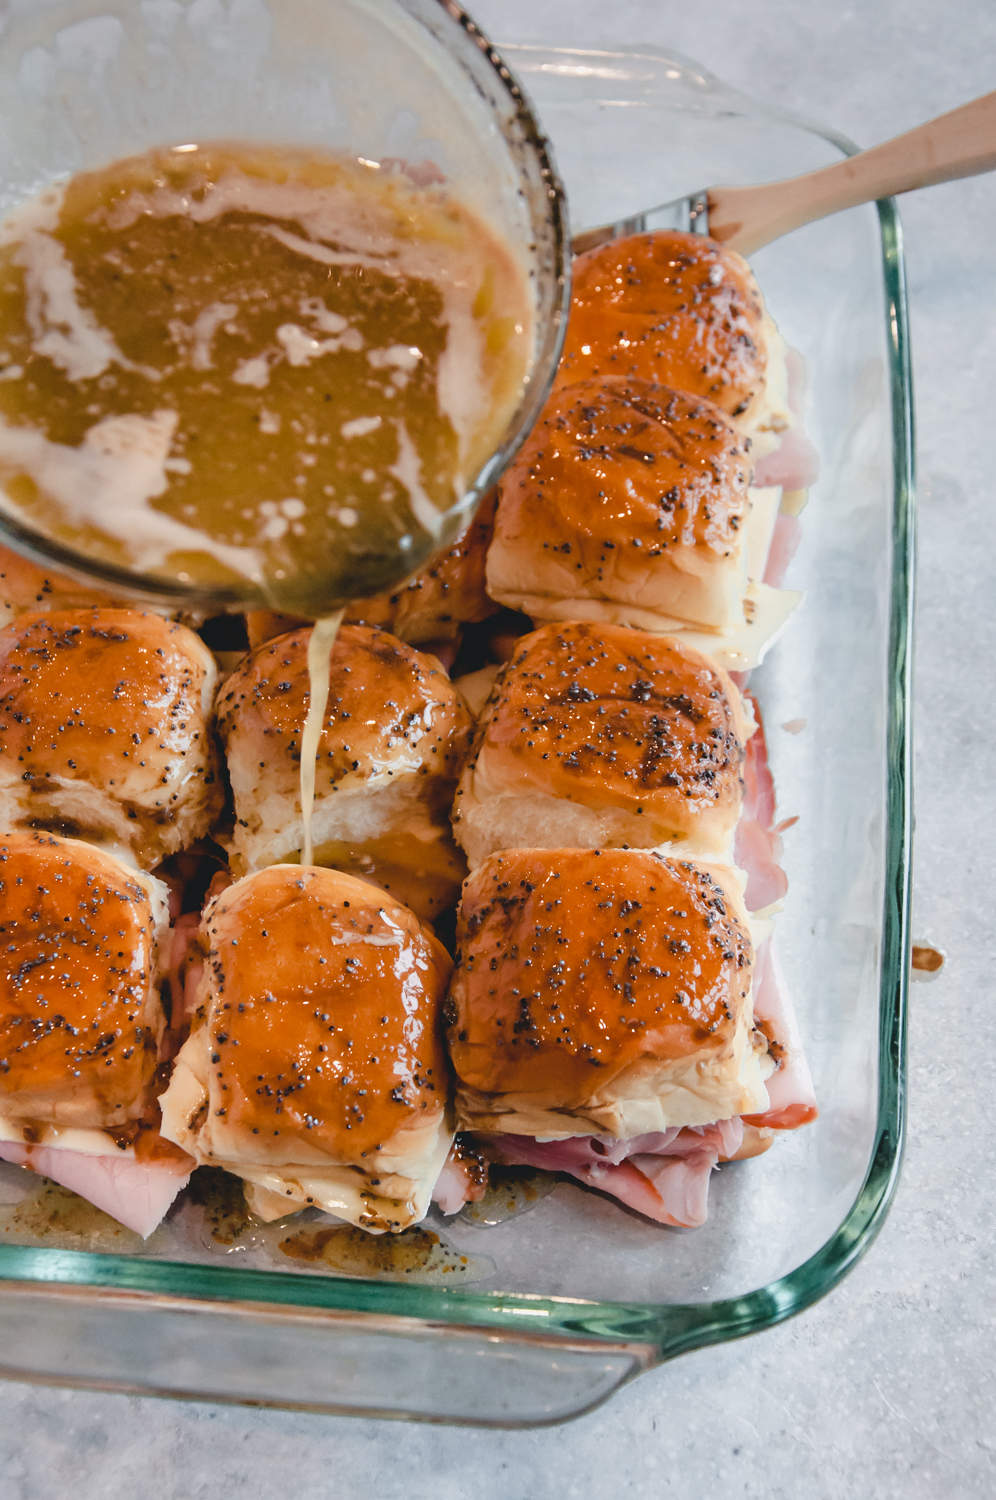 Baked Ham and Cheese Sandwiches - Made It. Ate It. Loved It.